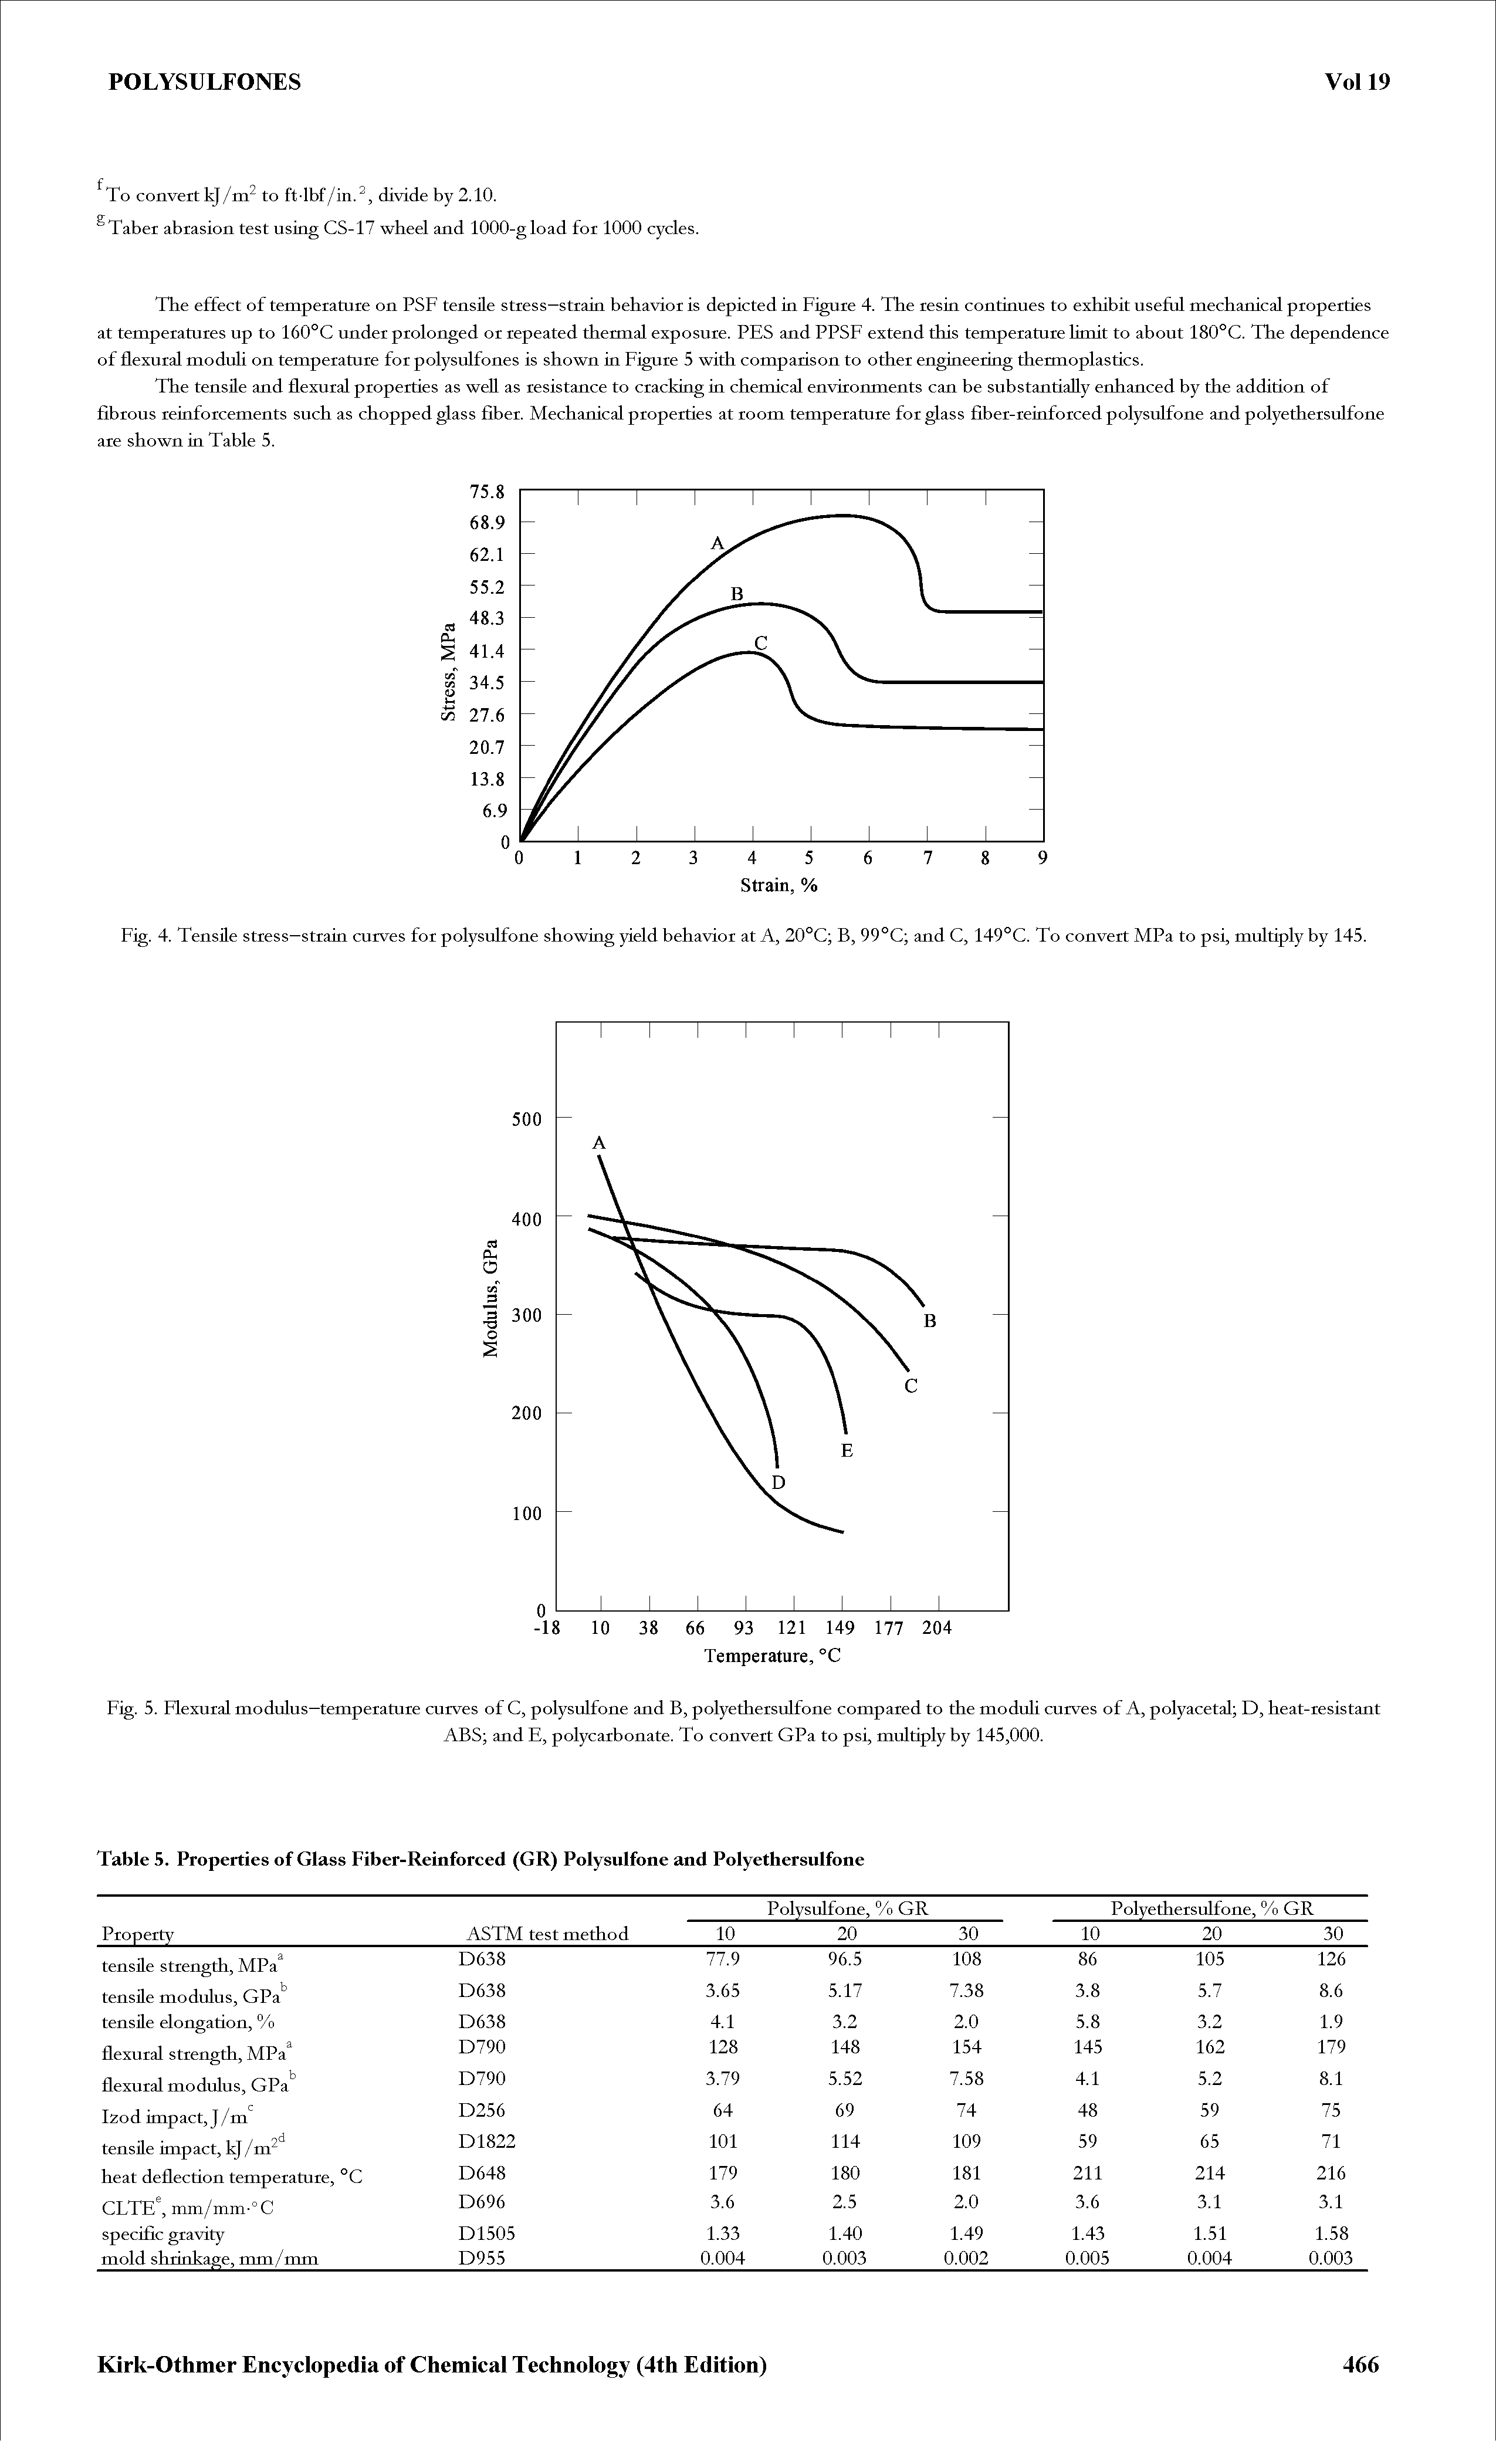 Fig. 5. Flexural modulus—temperature curves of C, polysulfone and B, polyethersulfone compared to the moduli curves of A, polyacetal D, heat-resistant...